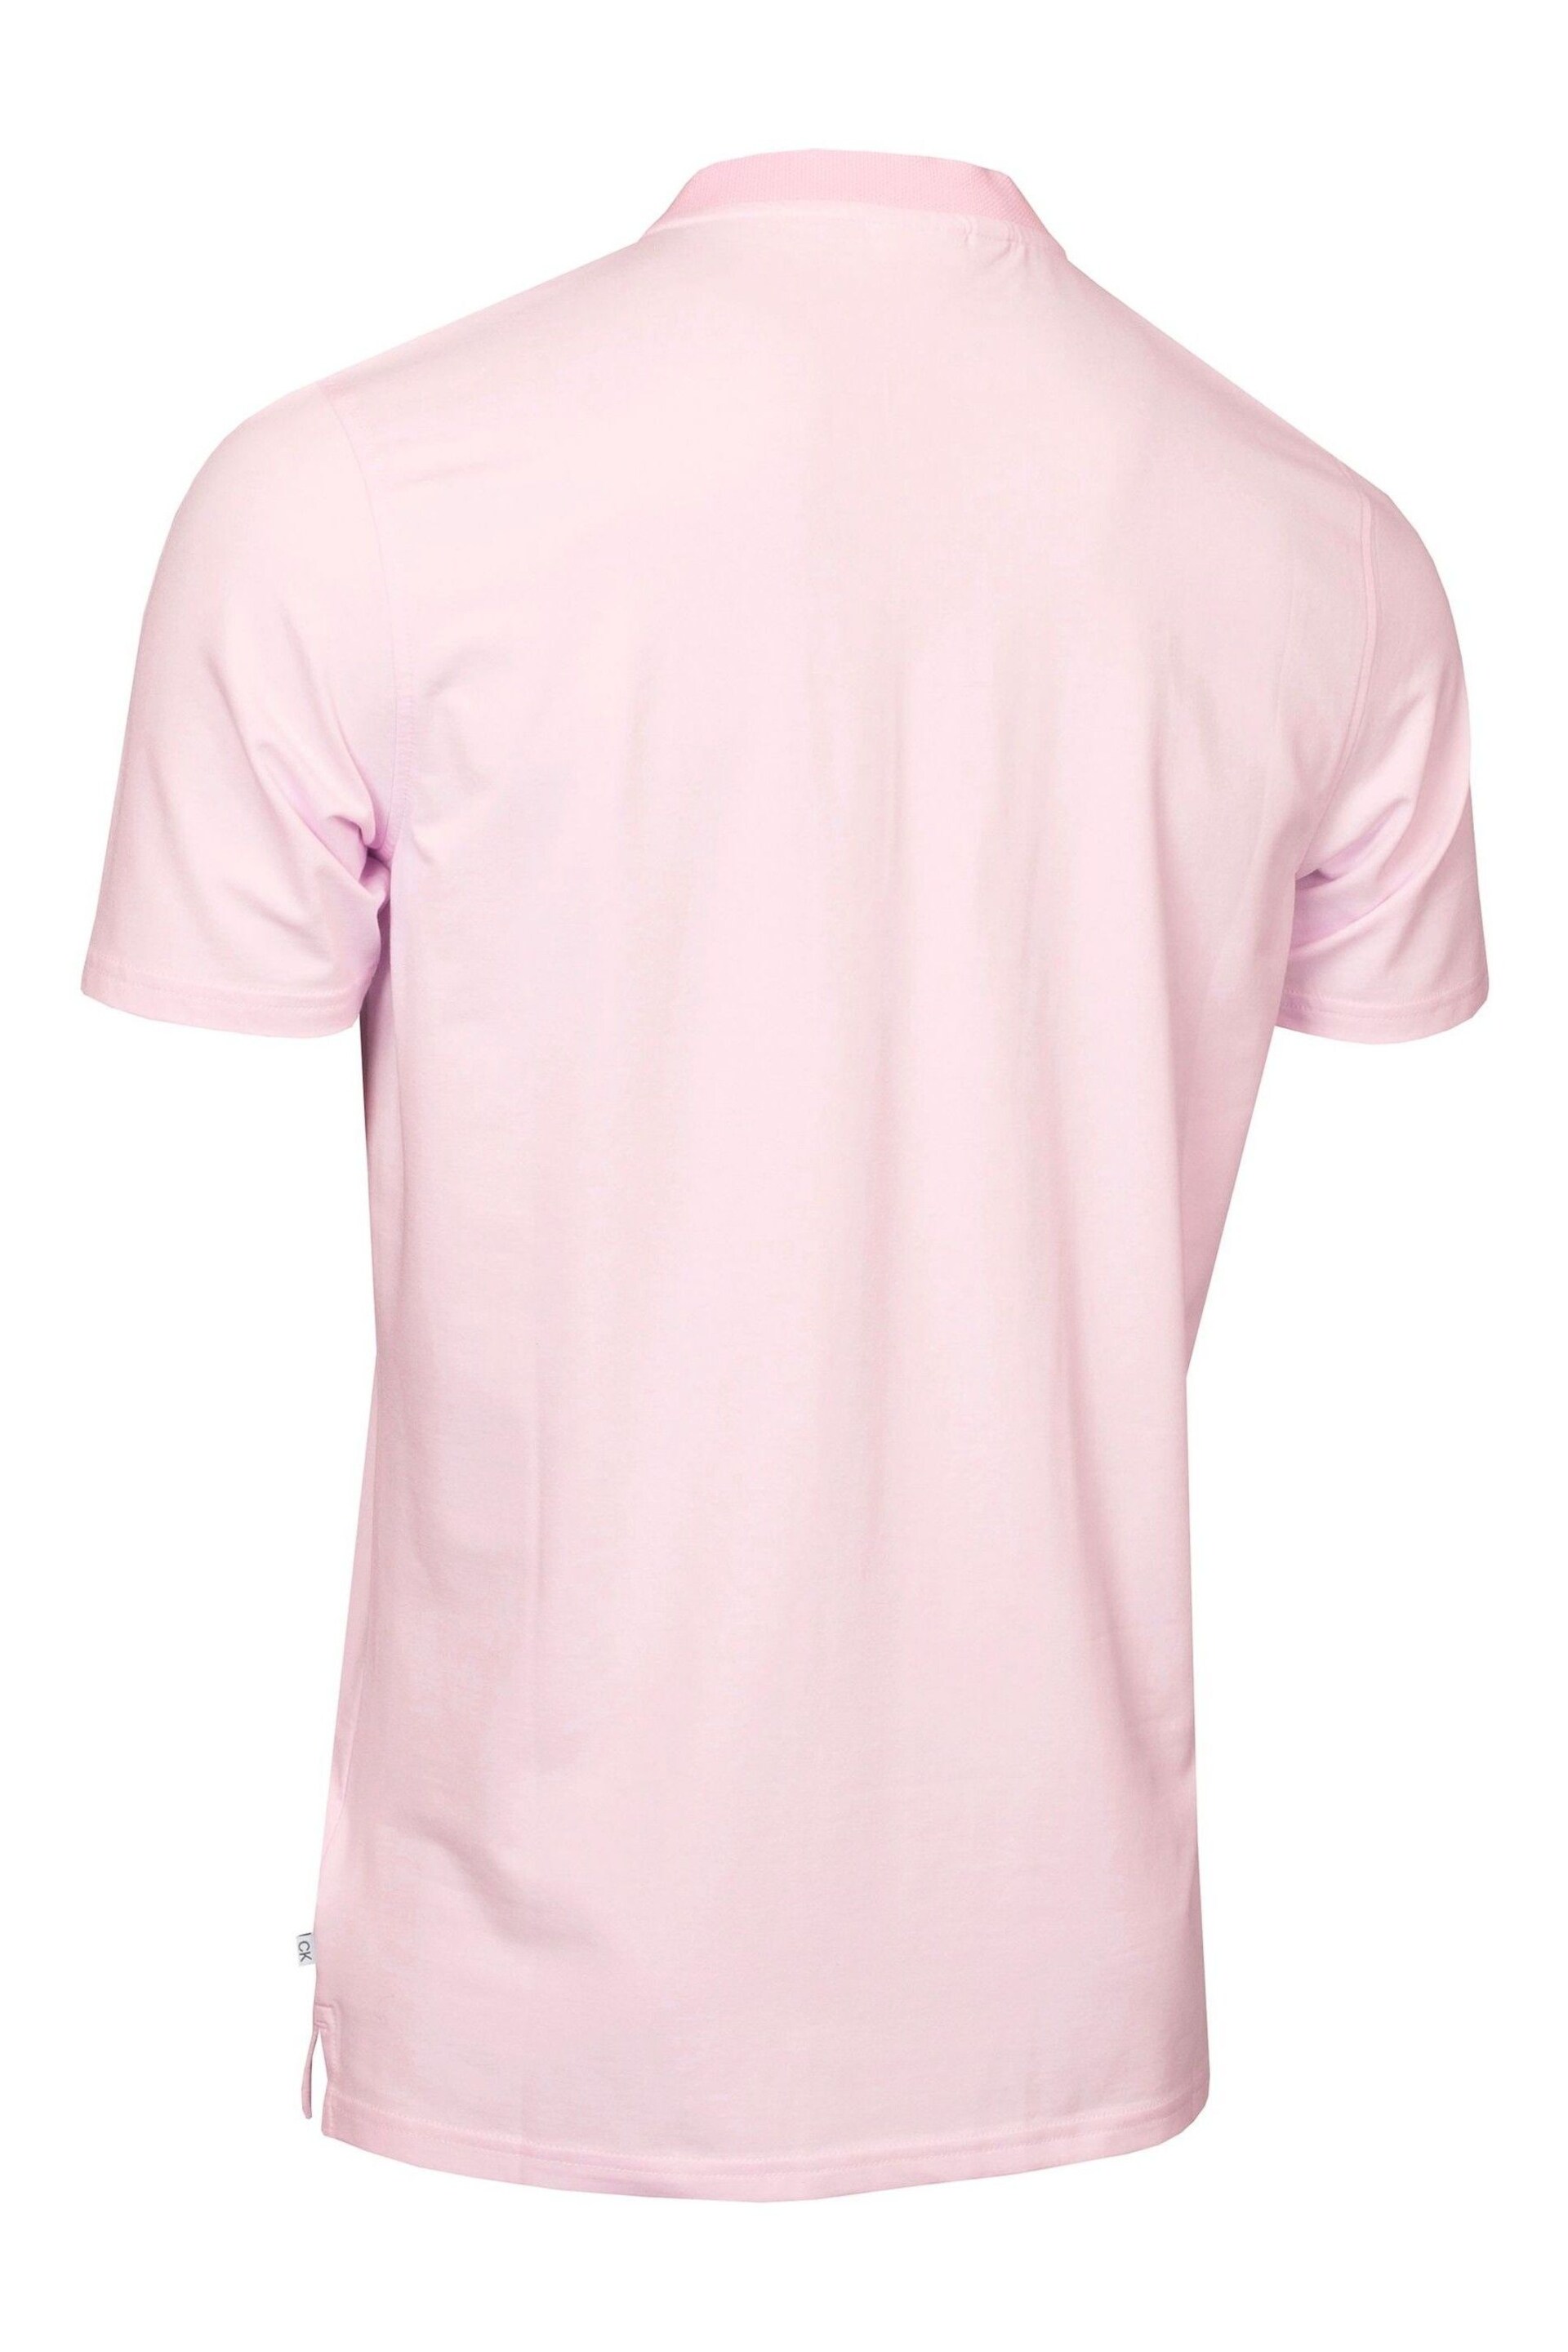 Calvin Klein Golf Pink Middlebrook Polo Shirt - Image 6 of 8